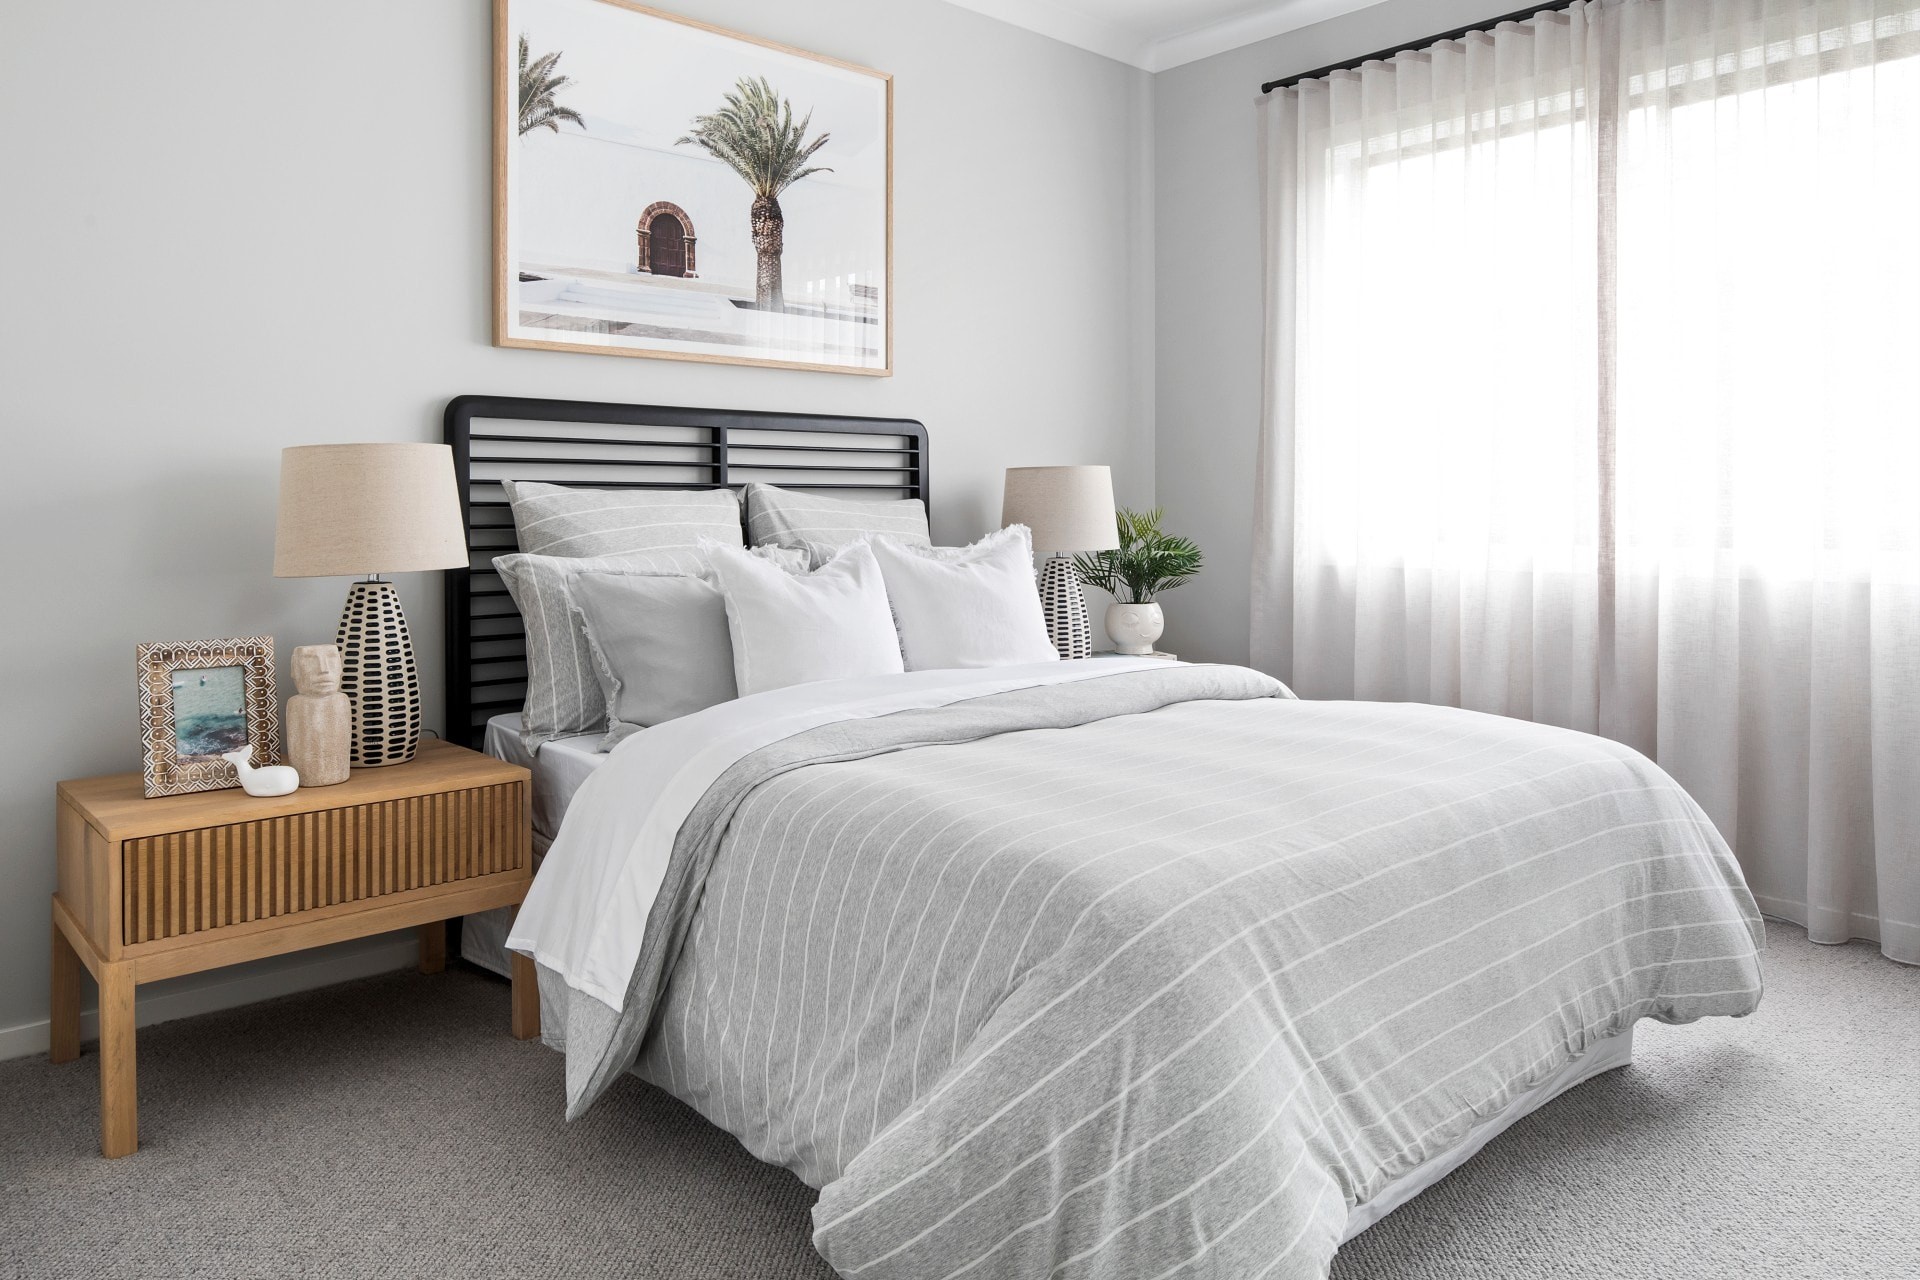 neutral grey and white bedroom with coastal timber bedside table and grey striped bedding